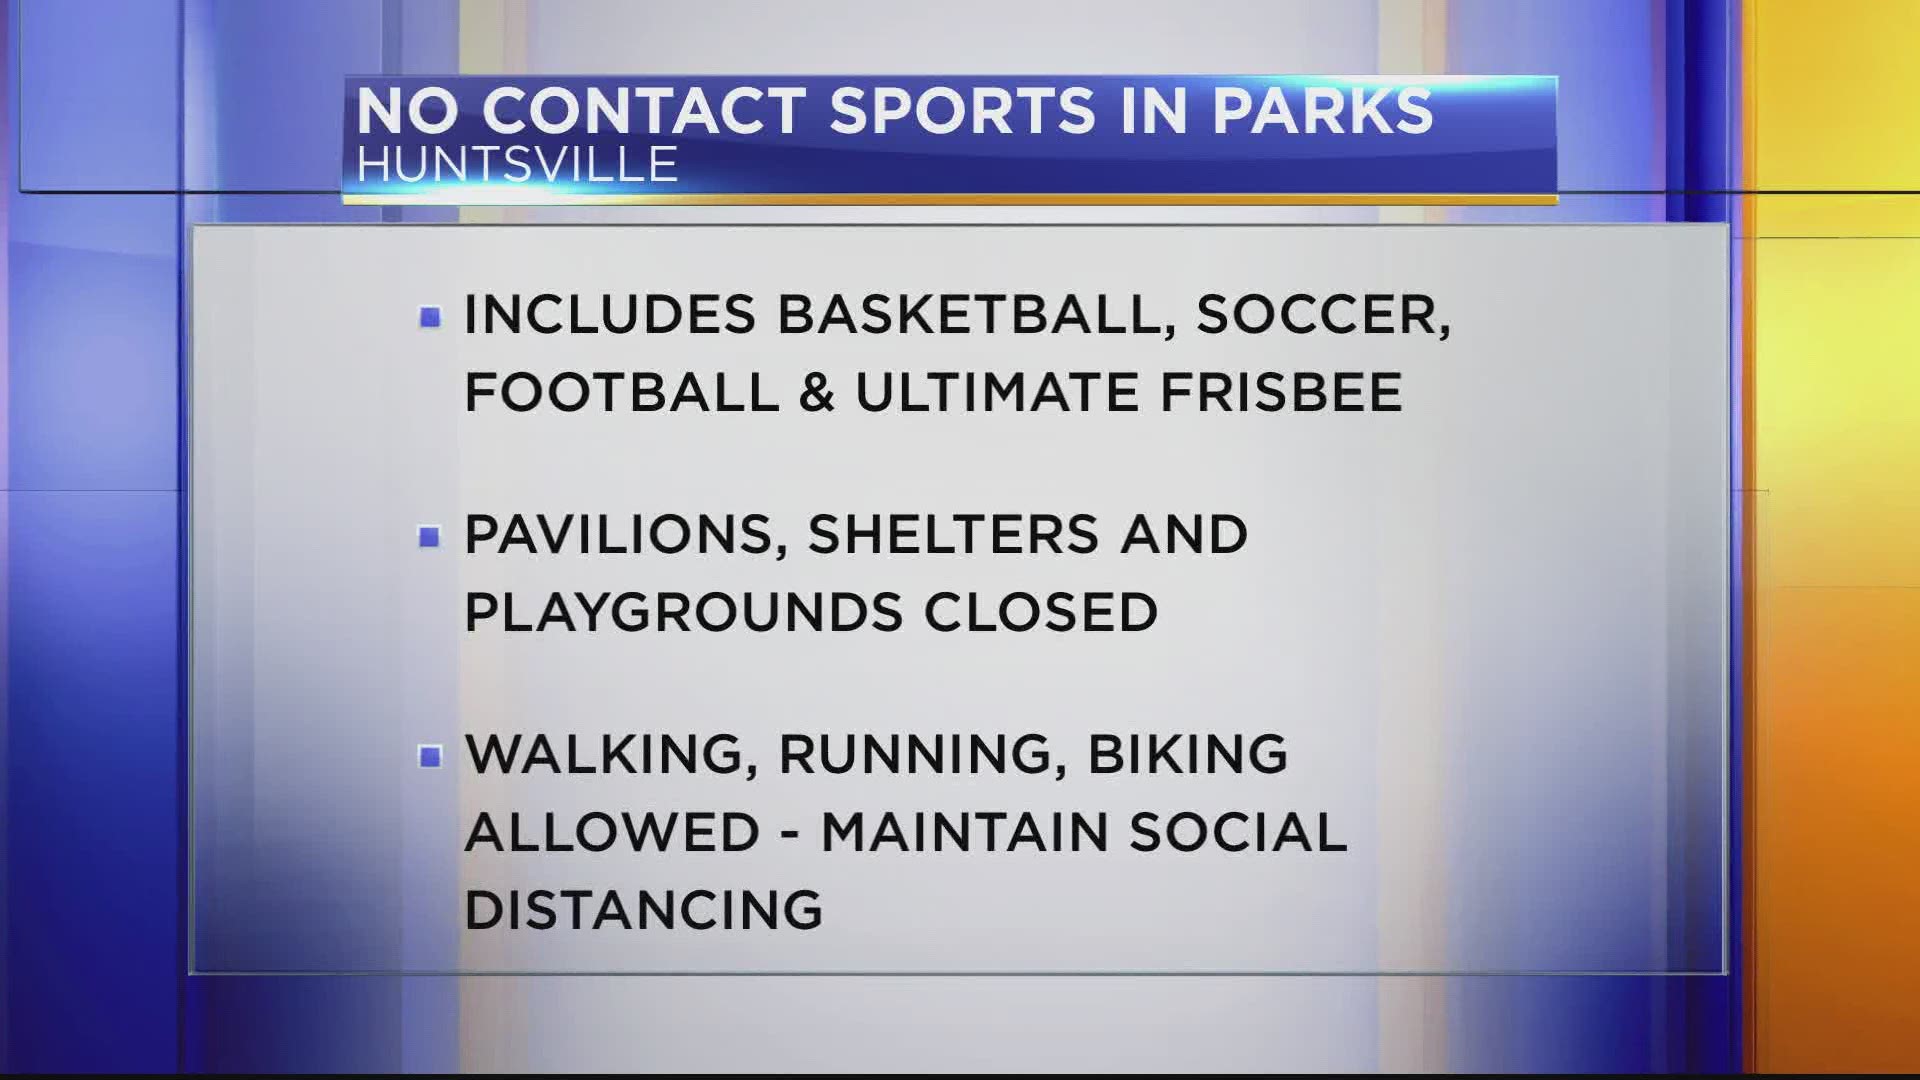 While the State order takes effect at 5 p.m. on March 28, the City will implement certain restrictions in its parks immediately.